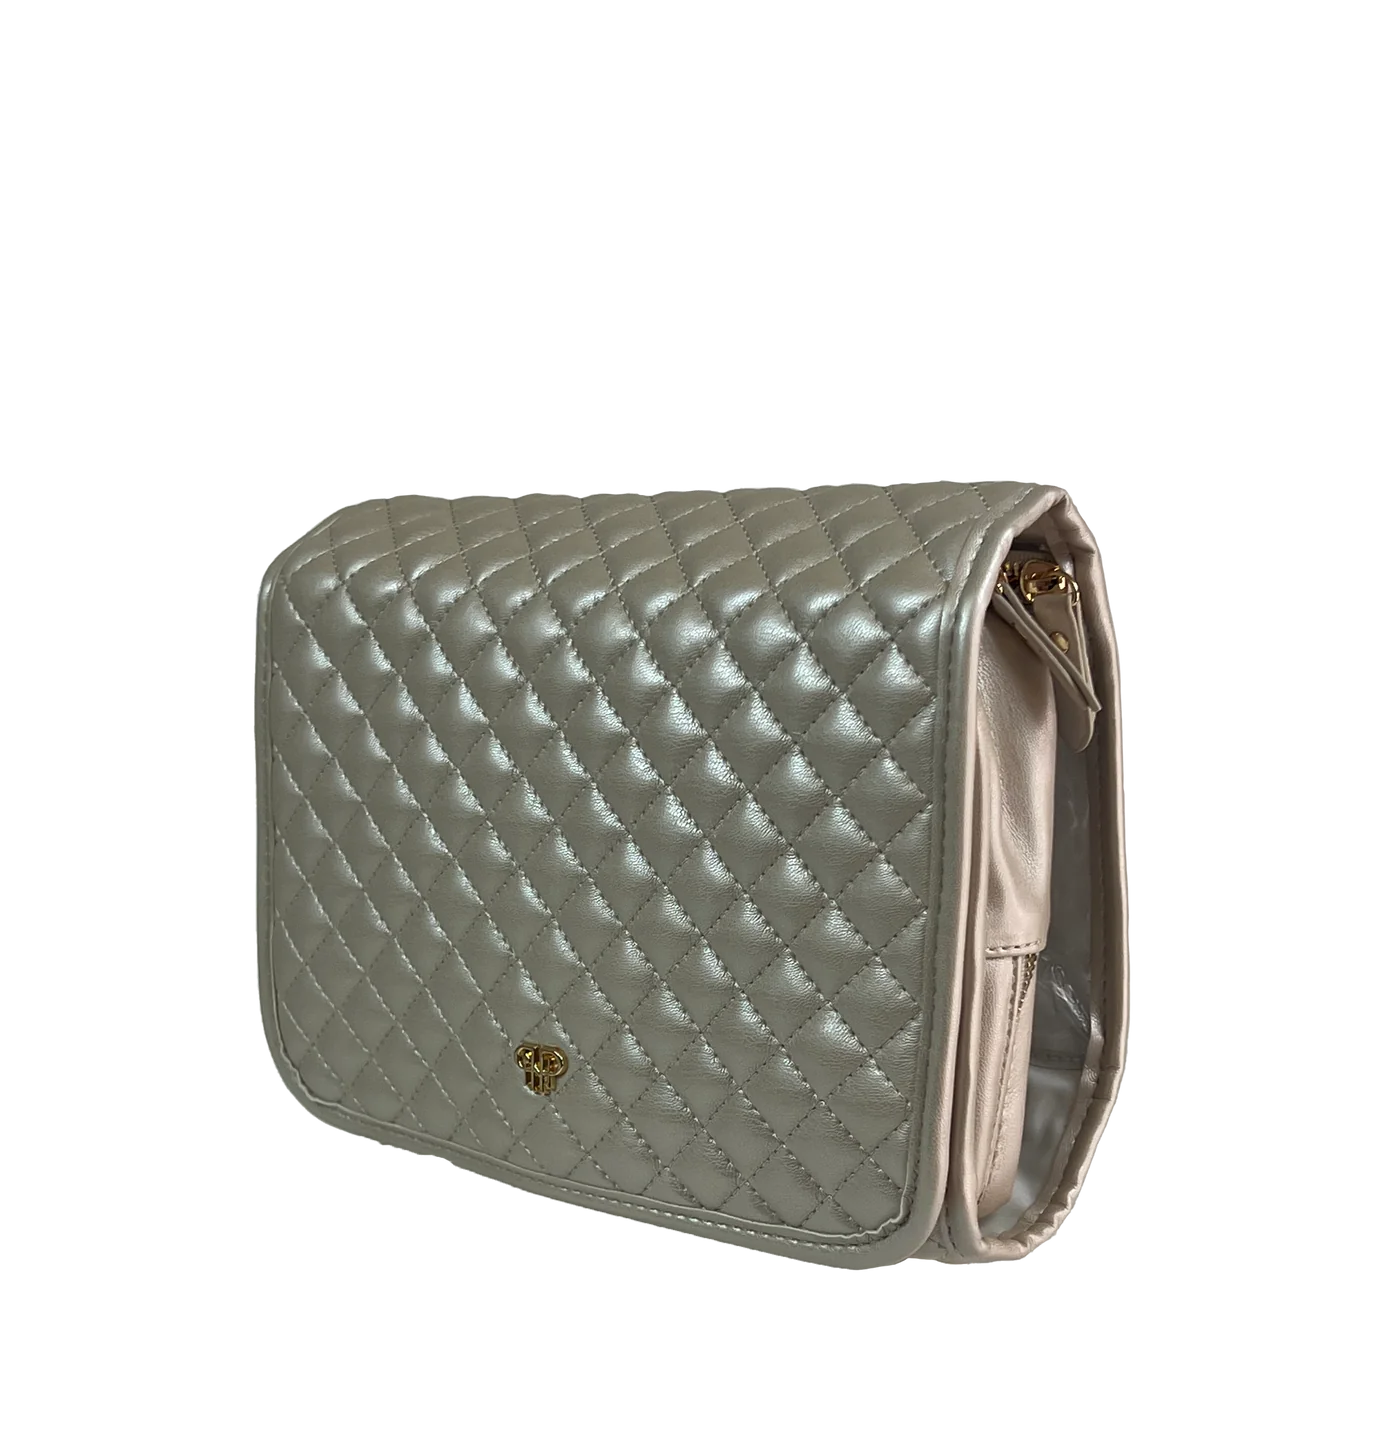 Getaway Toiletry Case - Pearl Quilted